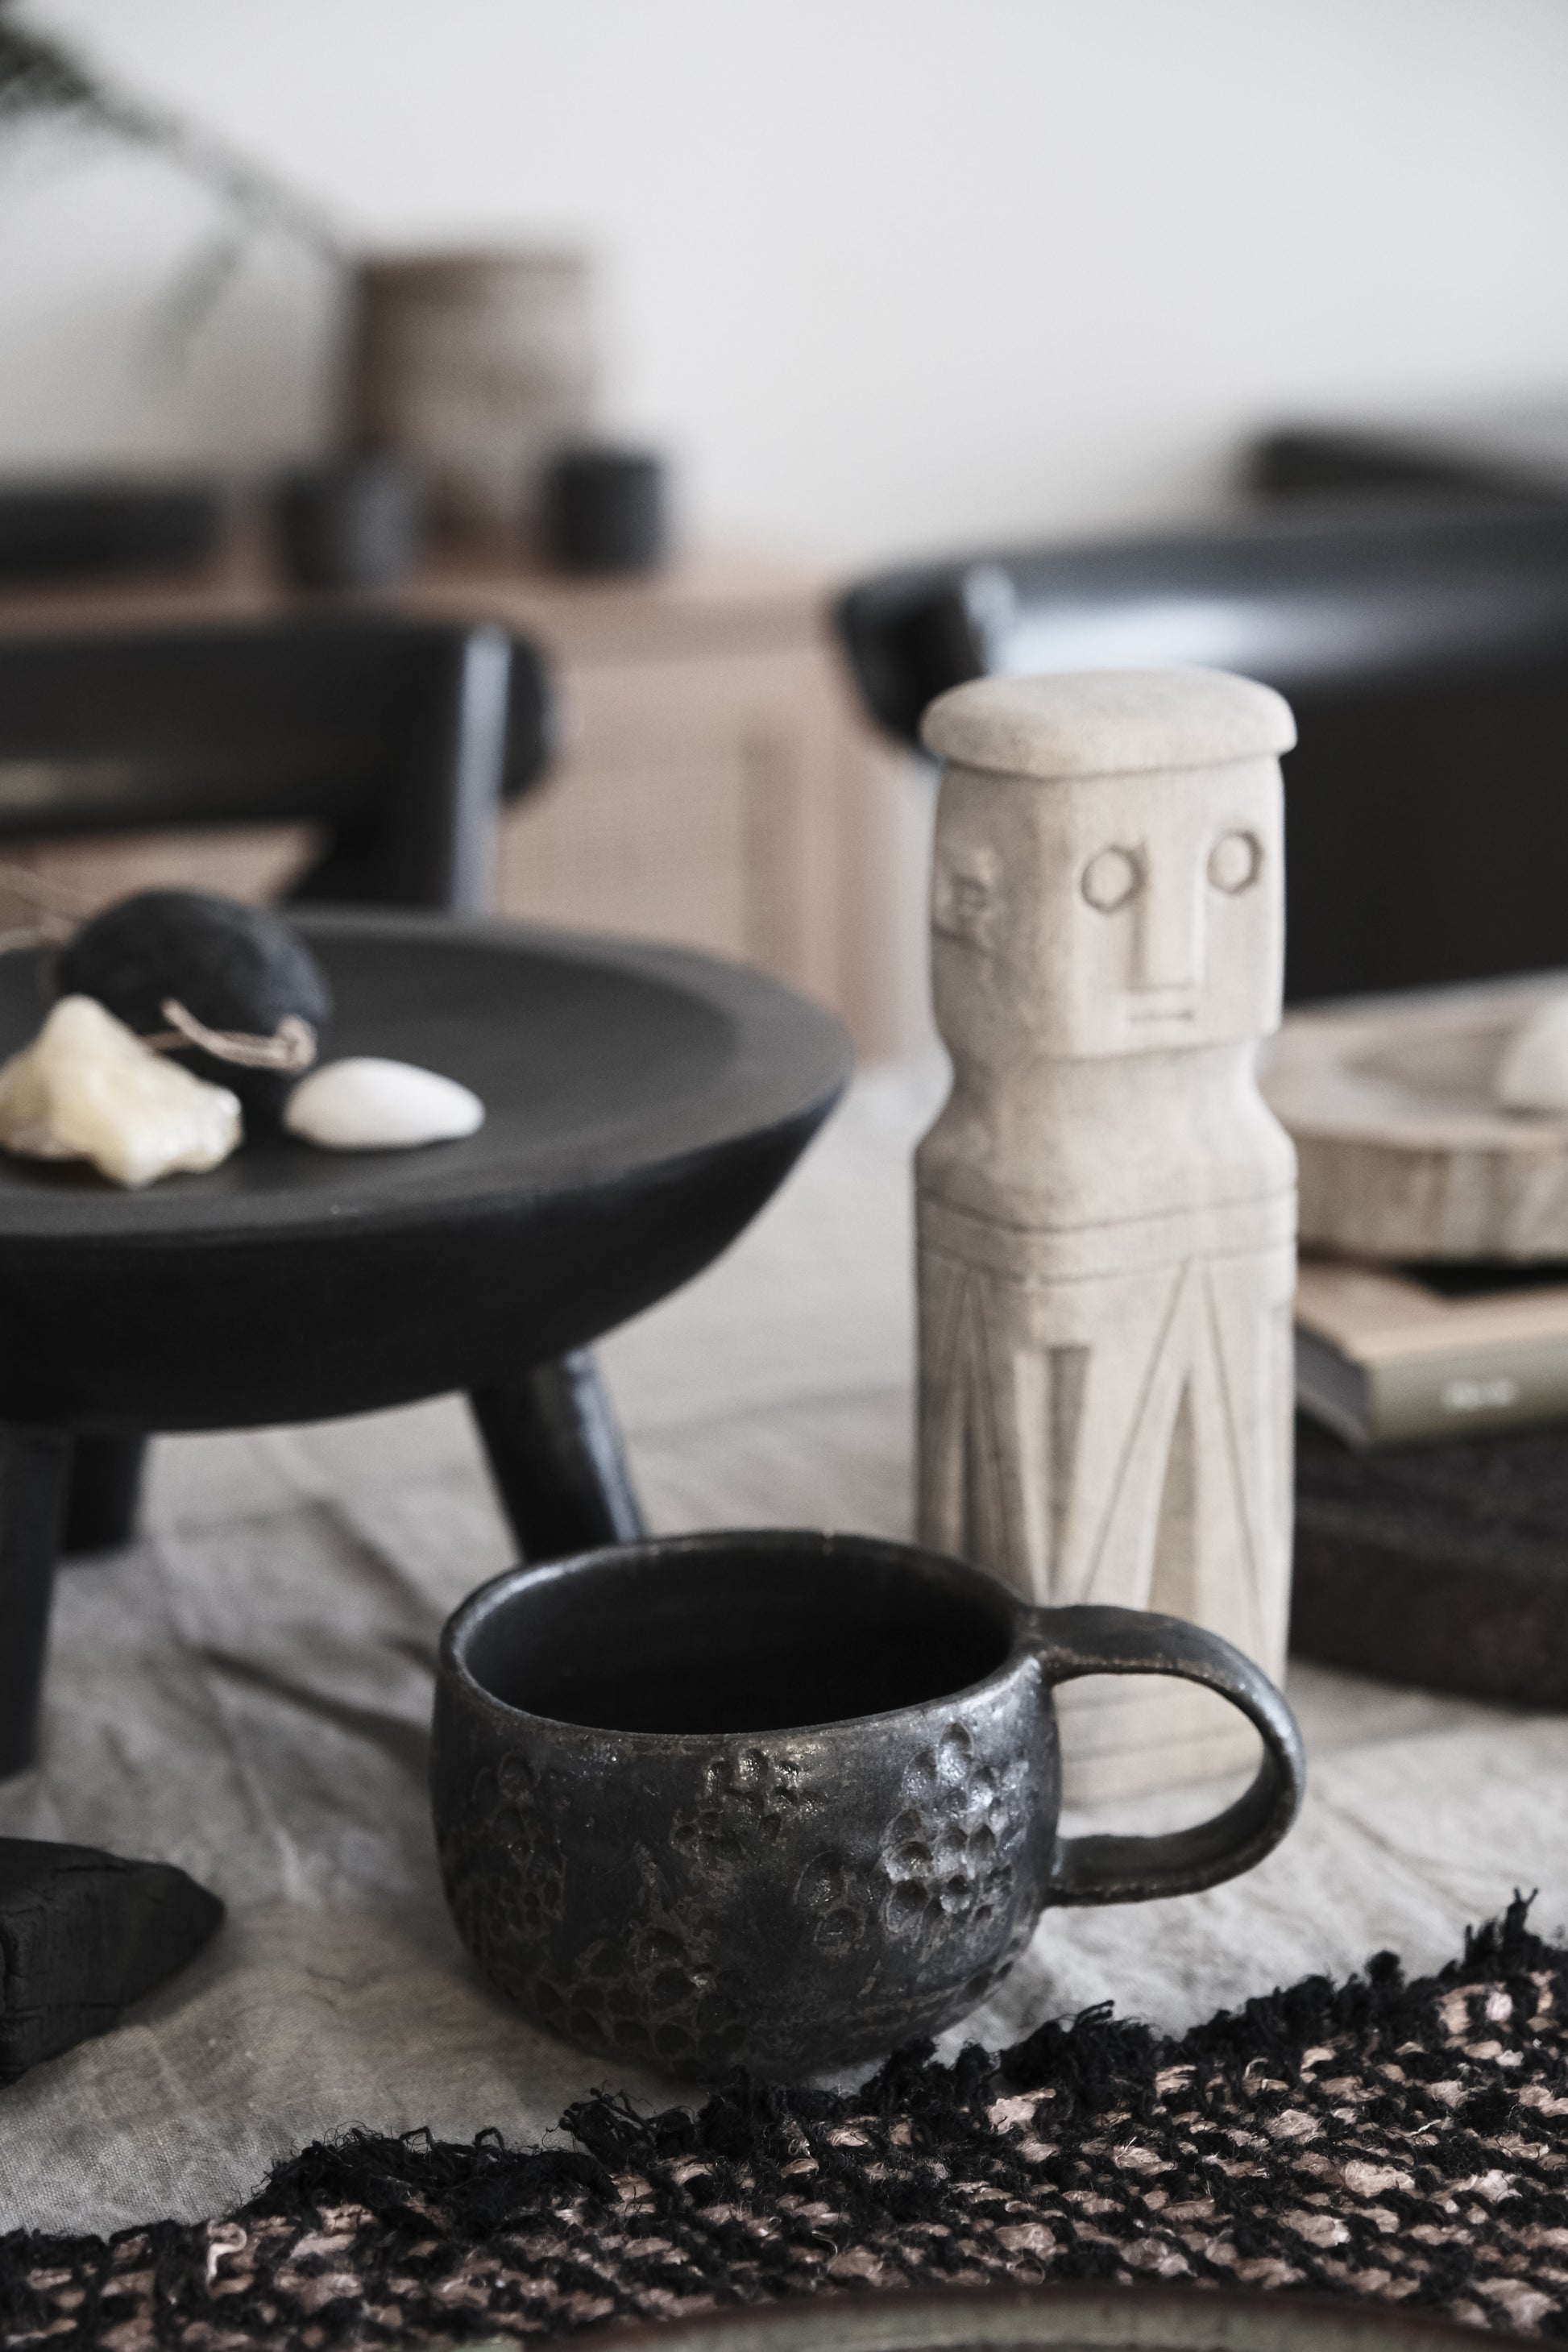 Image of the Ritual Offering Bowl from Terra Cruda's Australian homewares collection